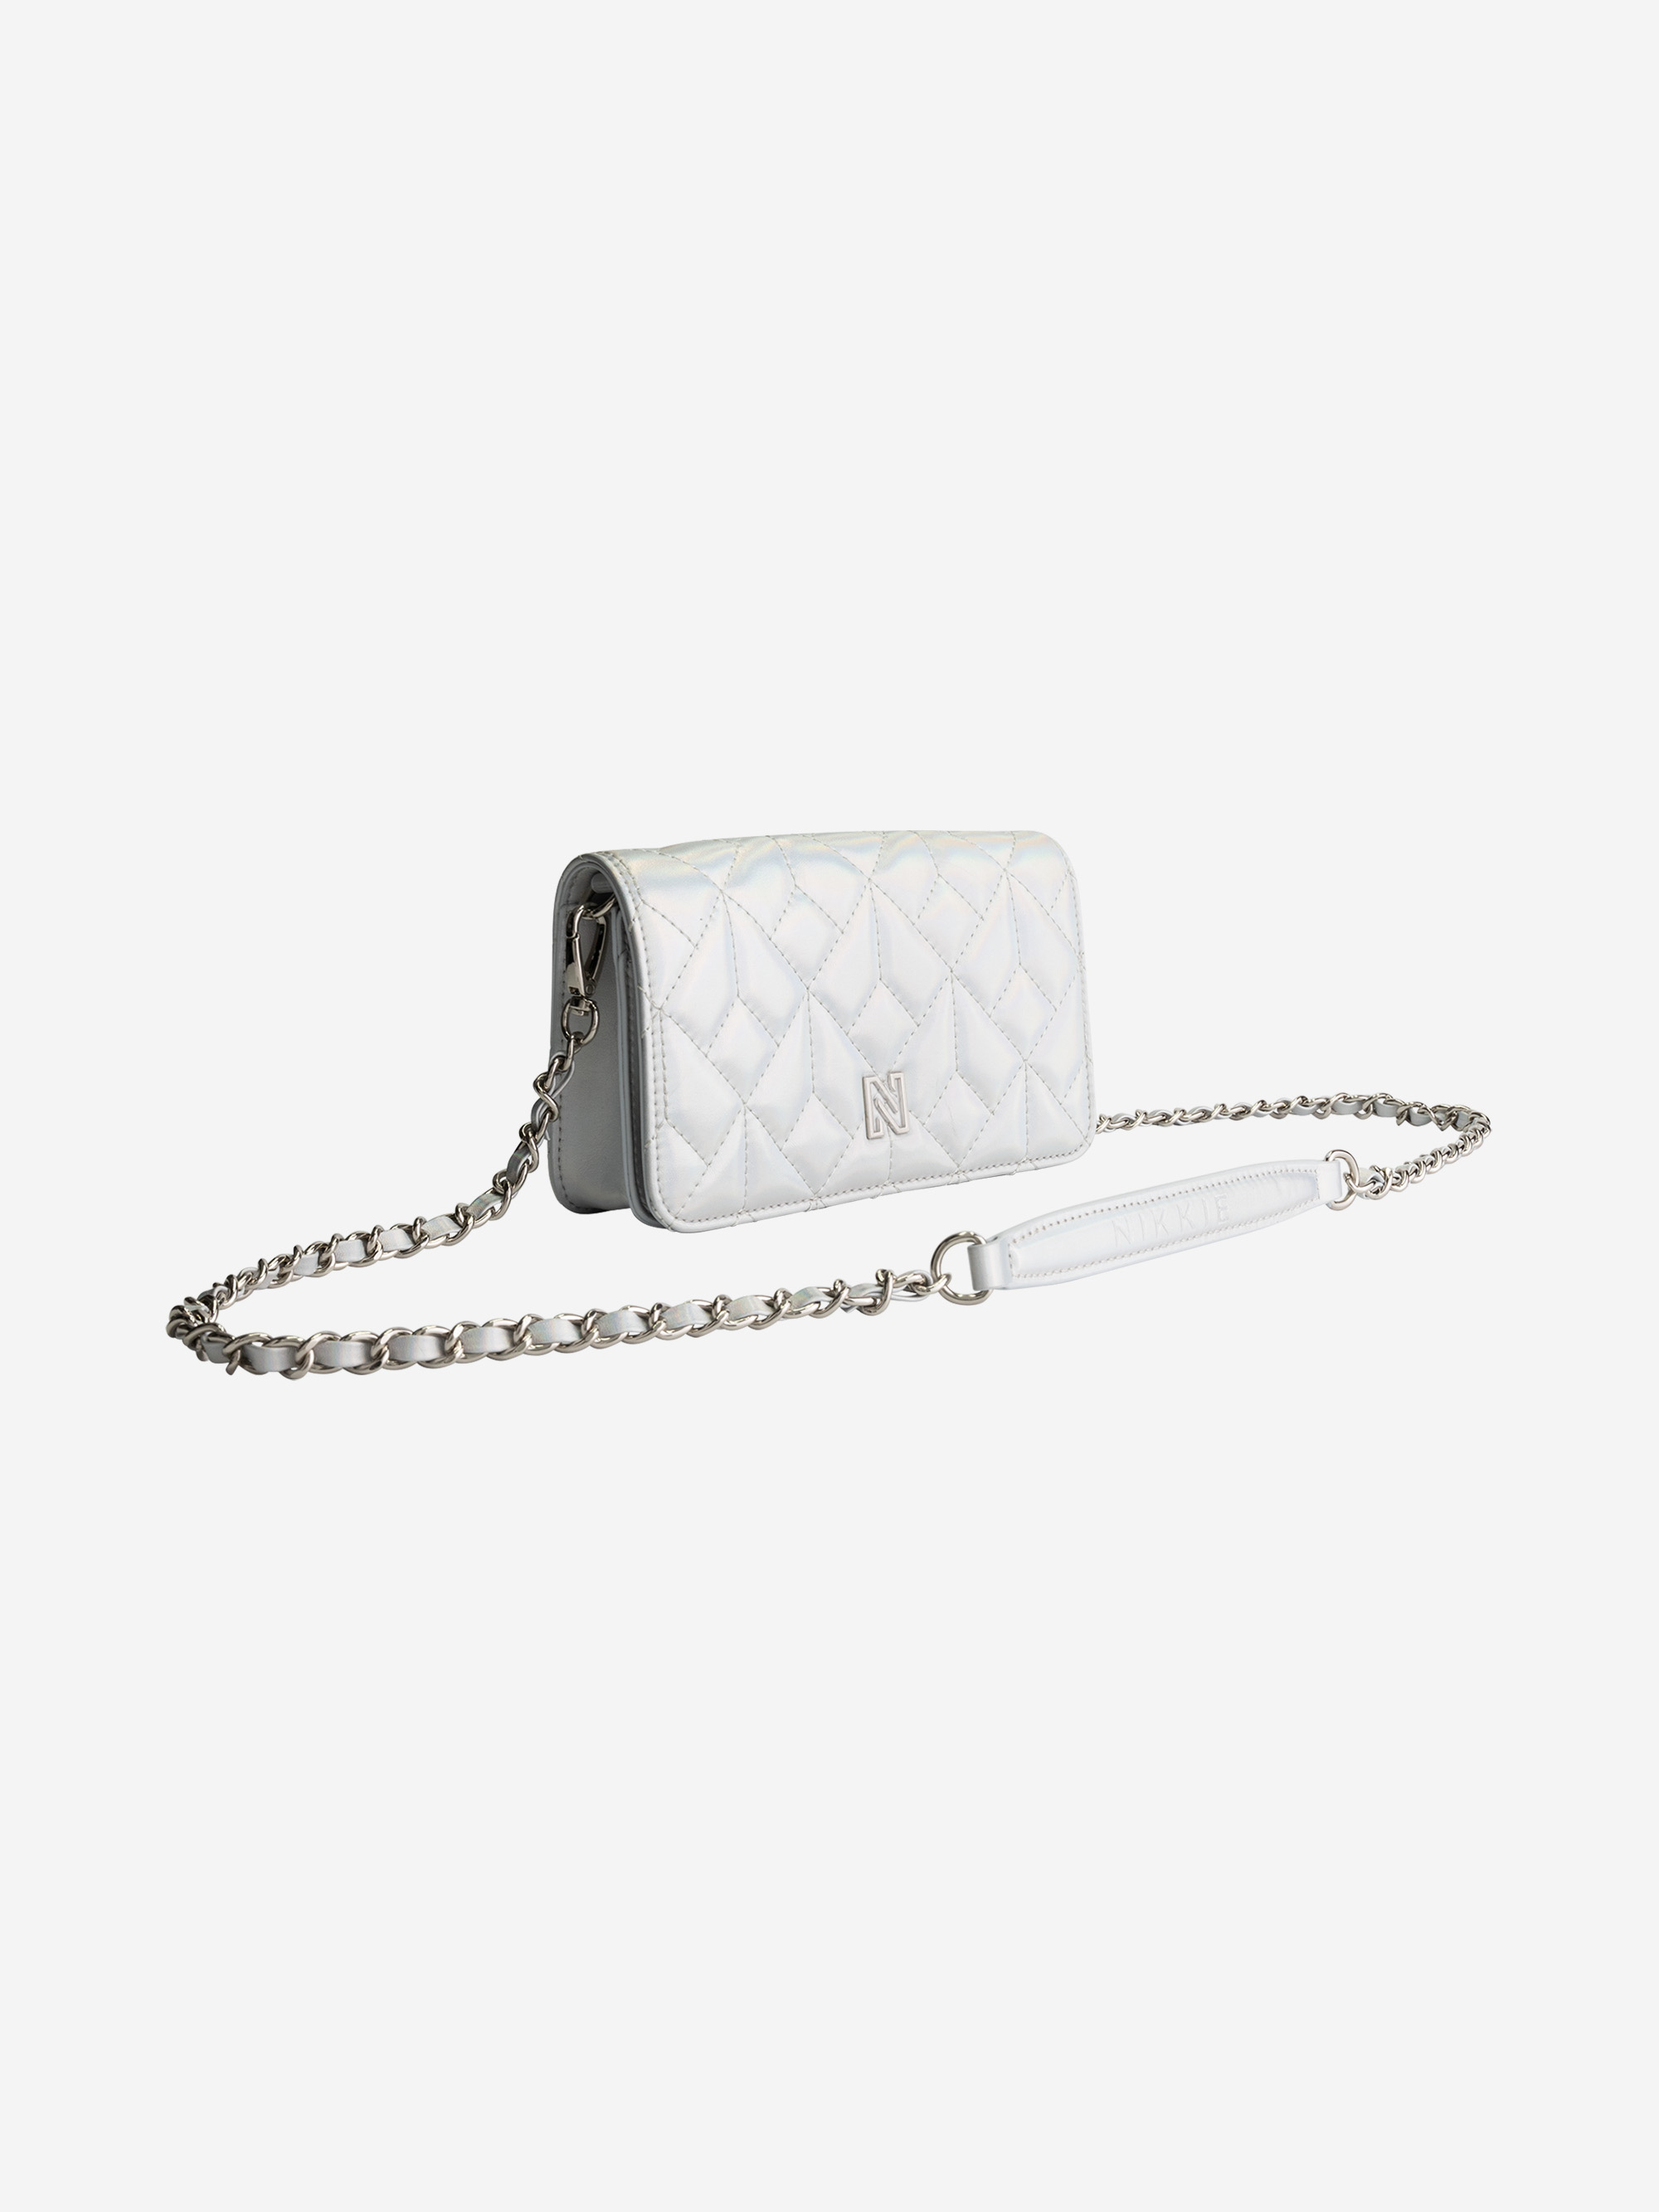 Metallic shoulderbag with chain